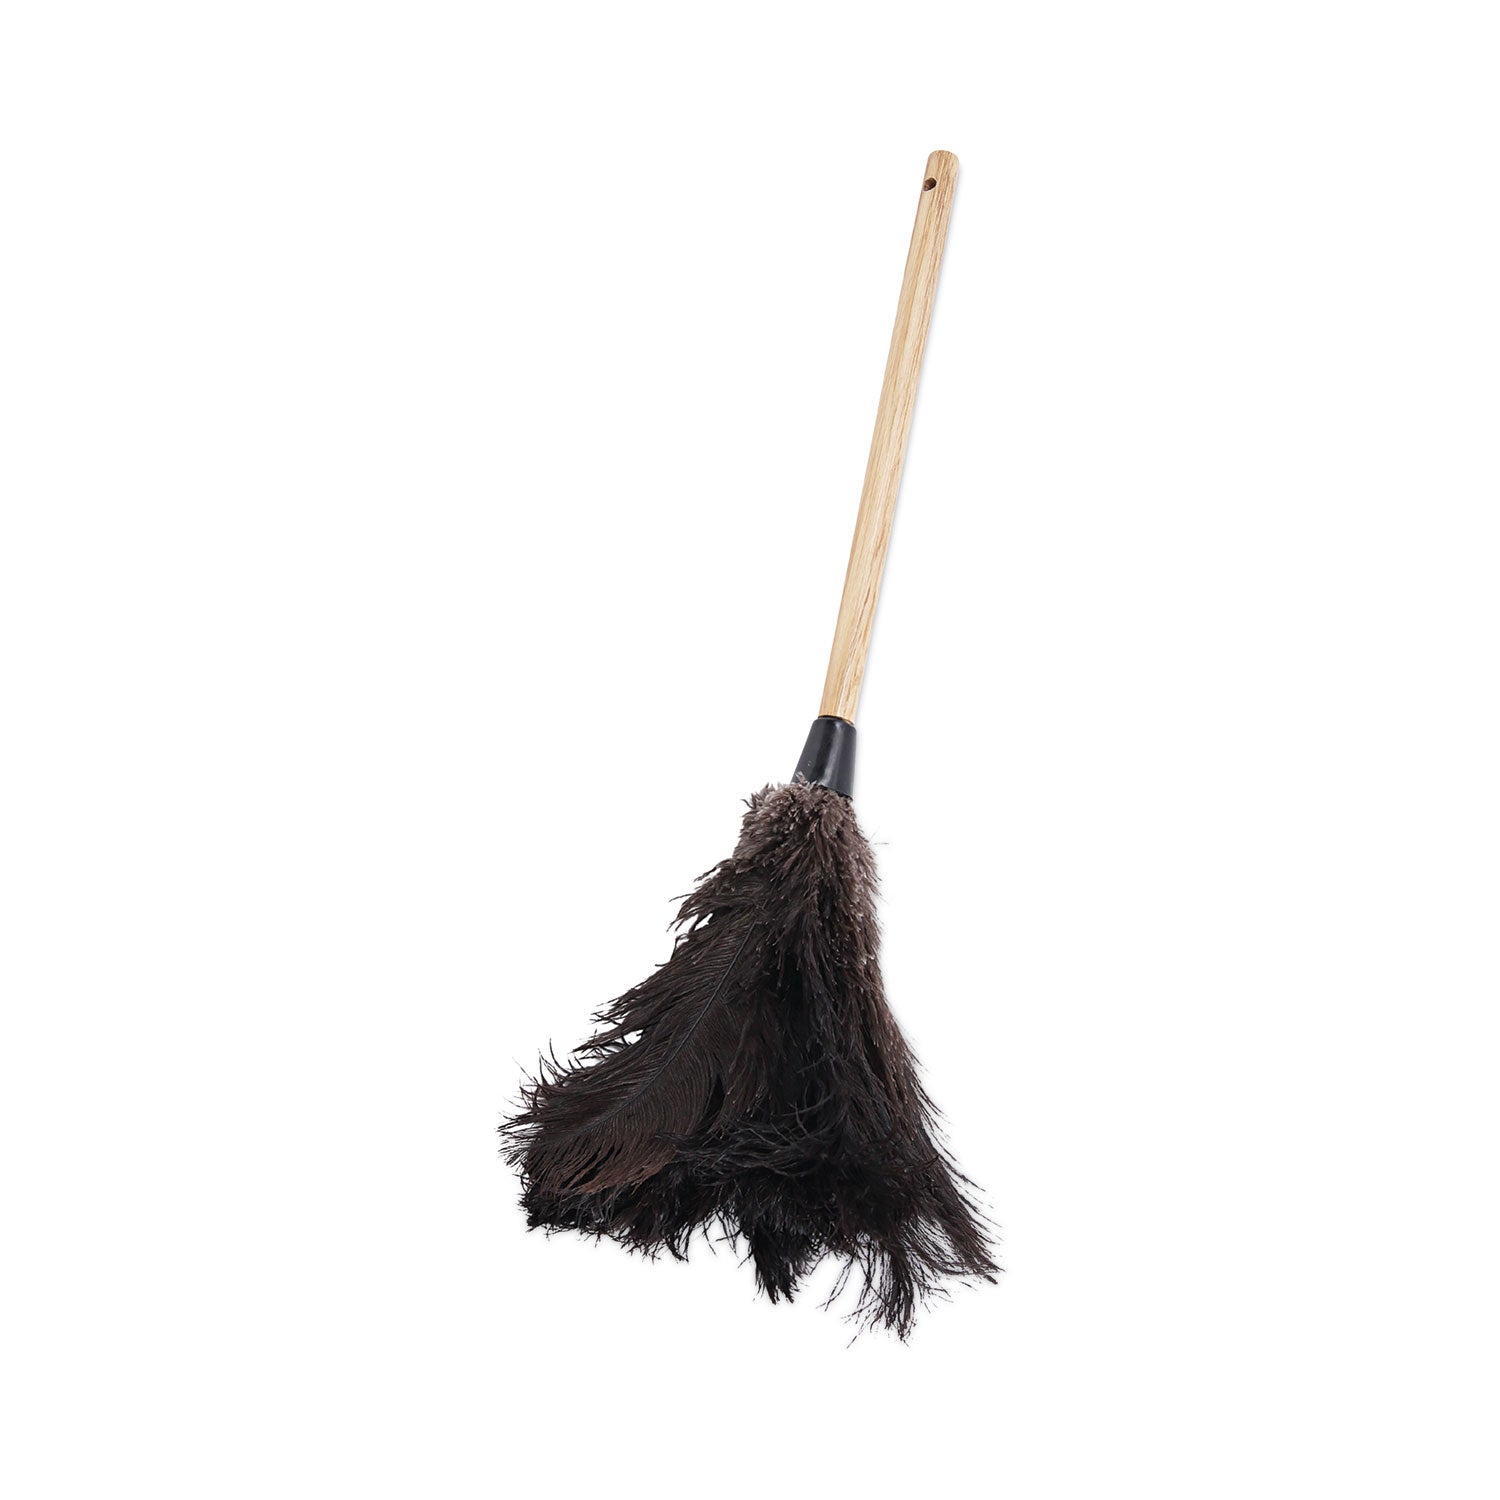 professional-ostrich-feather-duster-10-handle_bwk20bk - 1